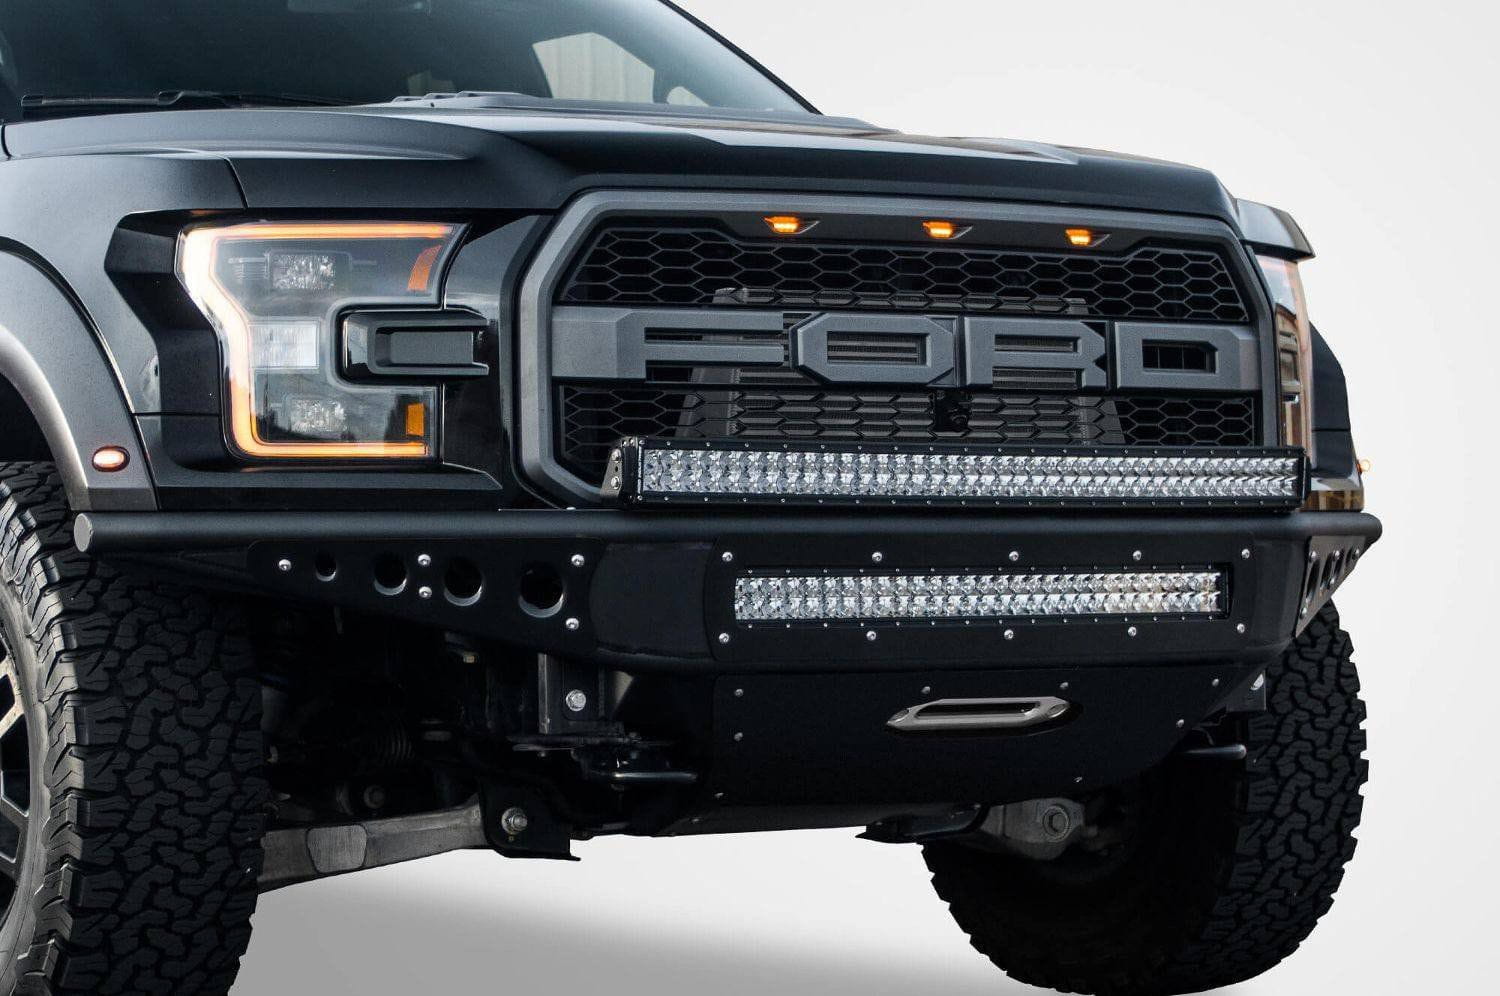 ADD F112502820103 Ford F150 Raptor 2017 Venom "R" Front Bumper With Winch and LED Mounts Hammer Black - BumperOnly